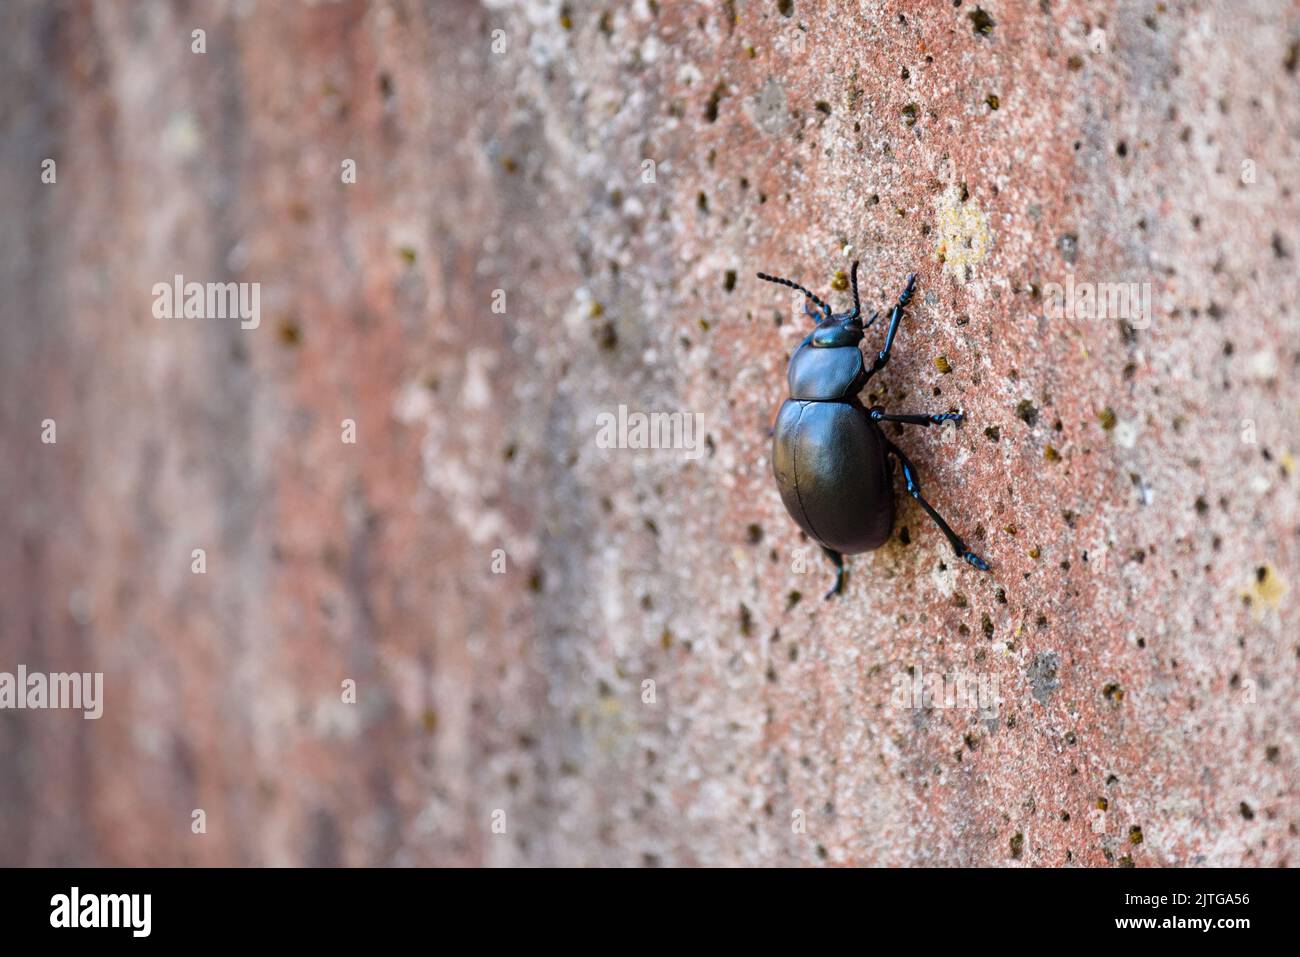 Close up view of a Bloody-nosed beetle (Timarcha tenebricosa) climbing a wall. Stock Photo